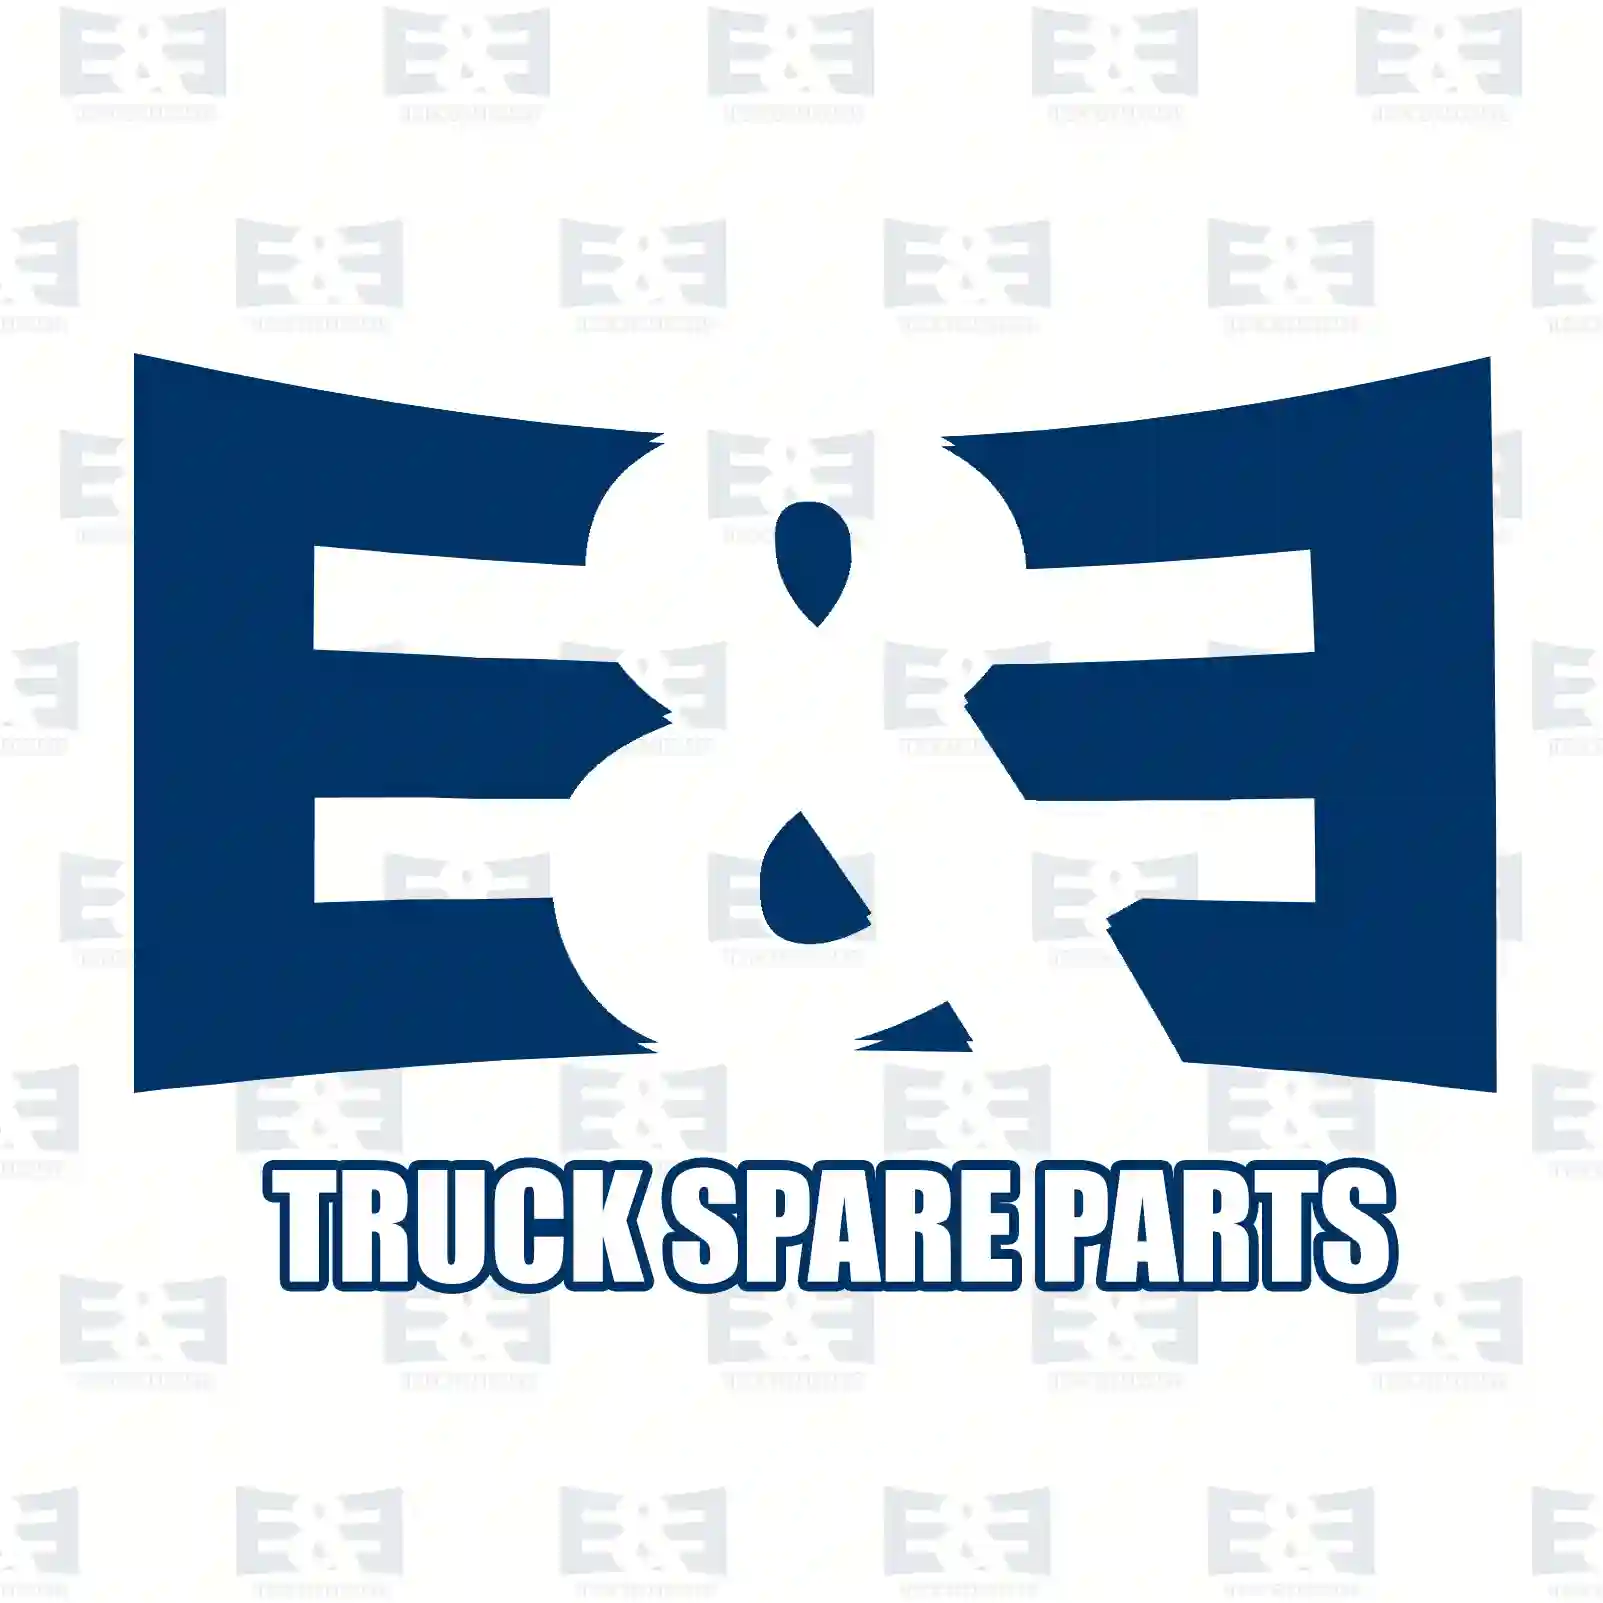 Electrical System Horn, EE No 2E2299810 ,  oem no:7421002113, 21002113, 23430966, ZG20556-0008 E&E Truck Spare Parts | Truck Spare Parts, Auotomotive Spare Parts